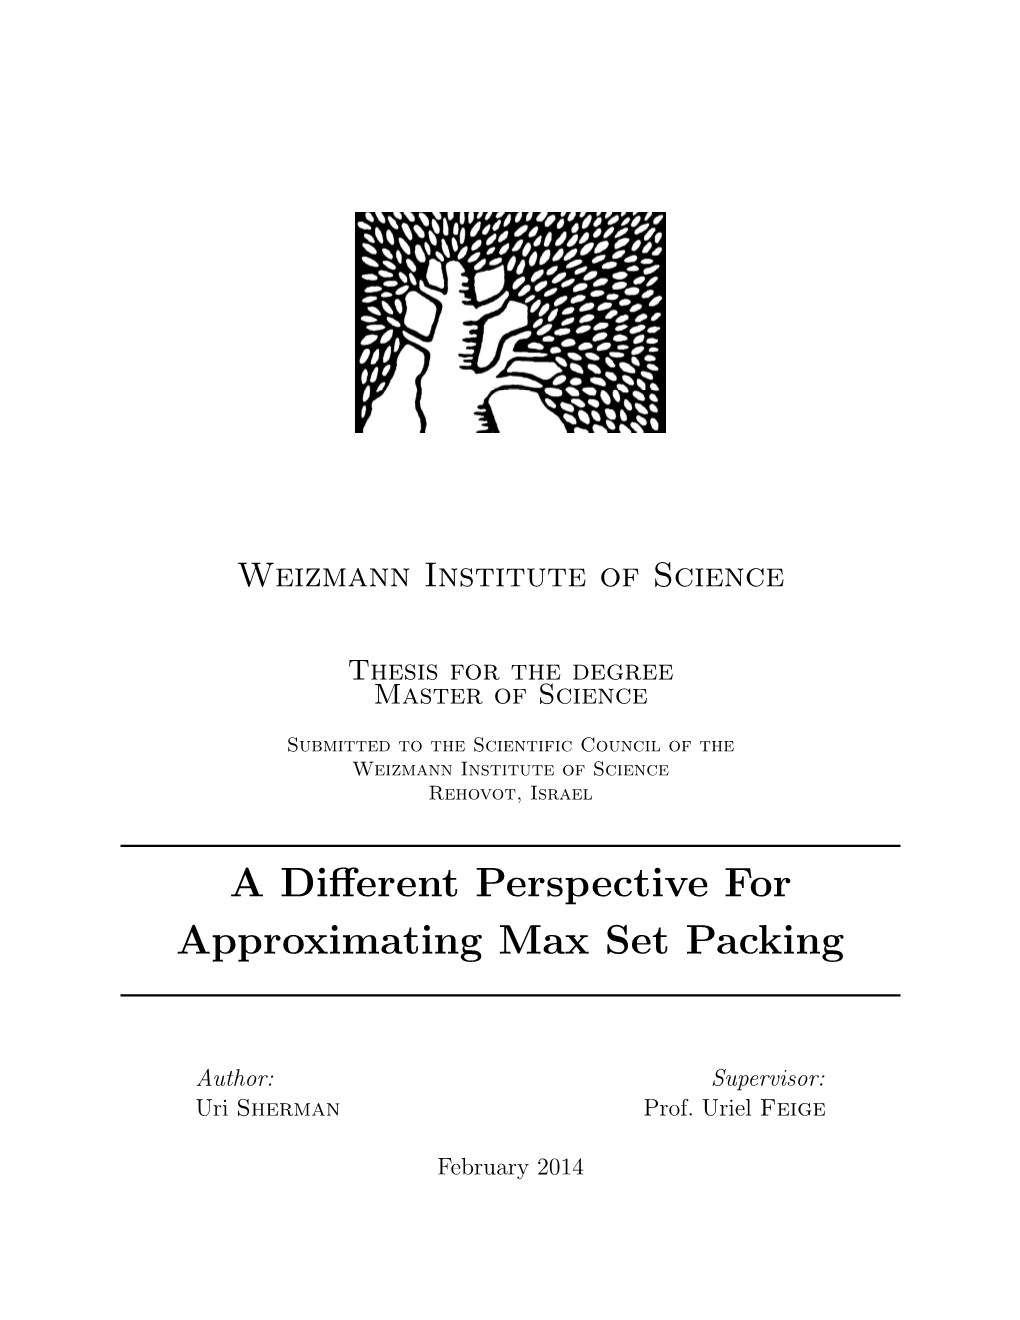 A Different Perspective for Approximating Max Set Packing